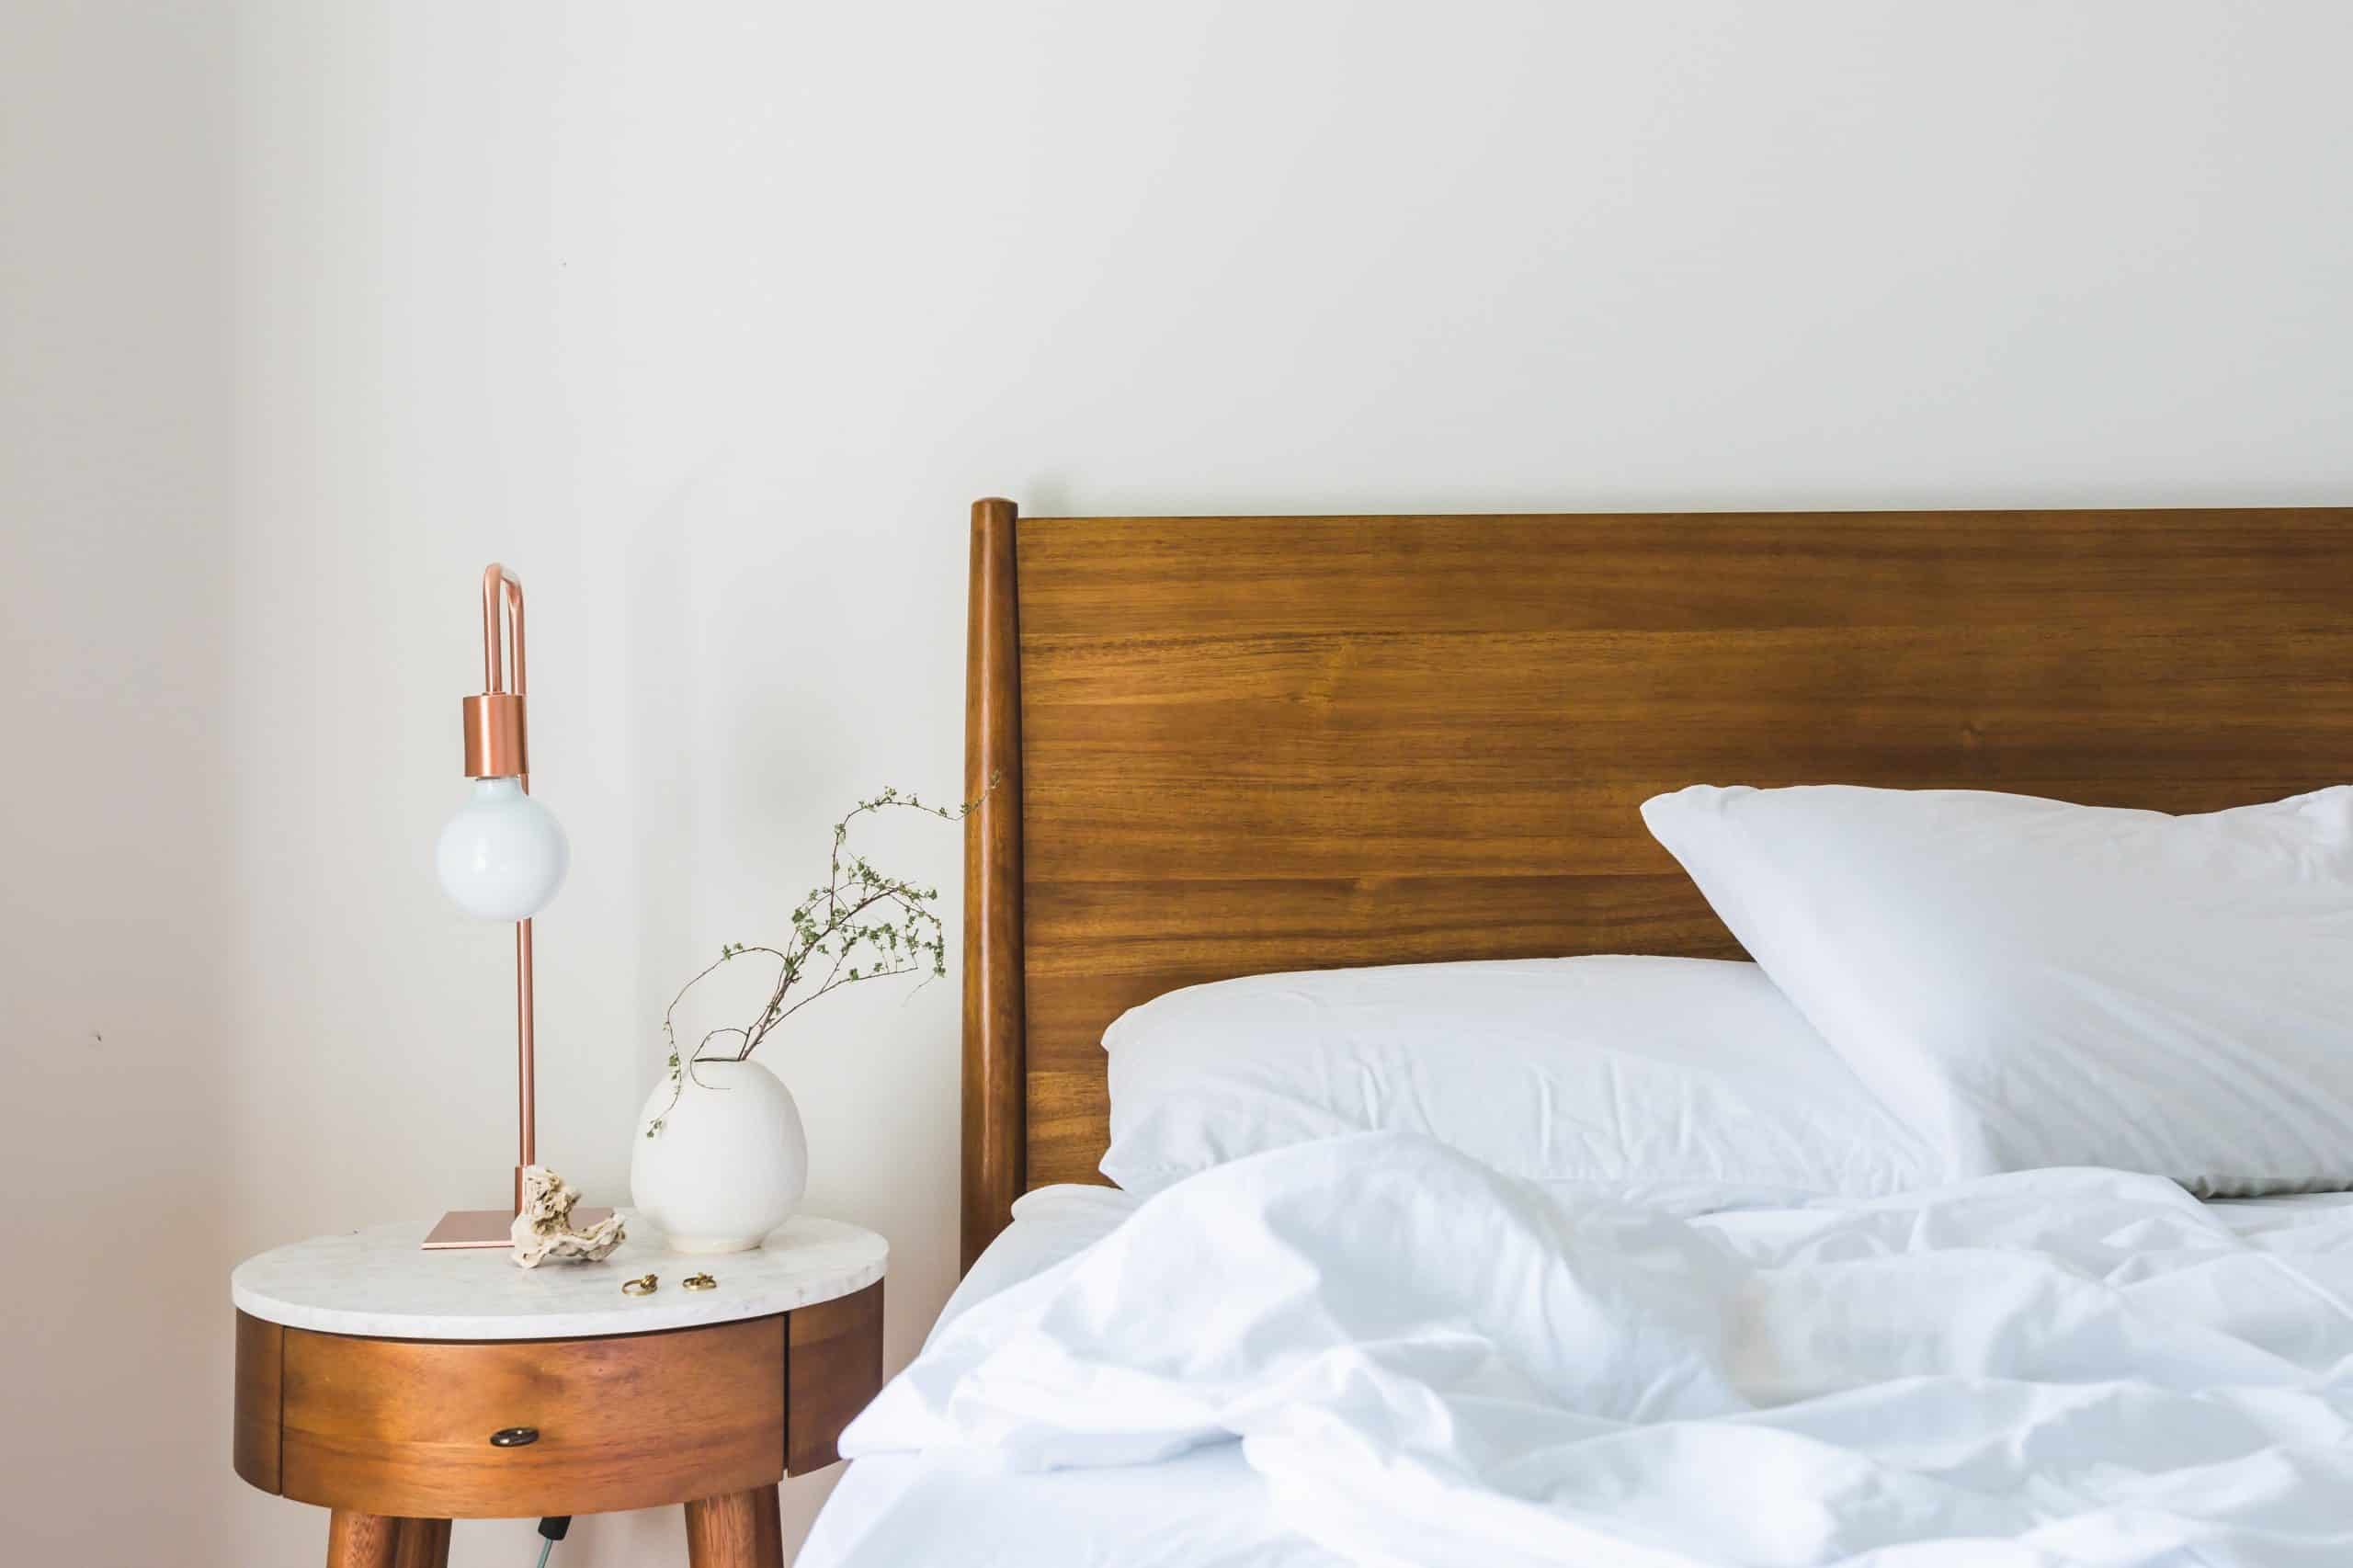 How to choose the right headboard for you?